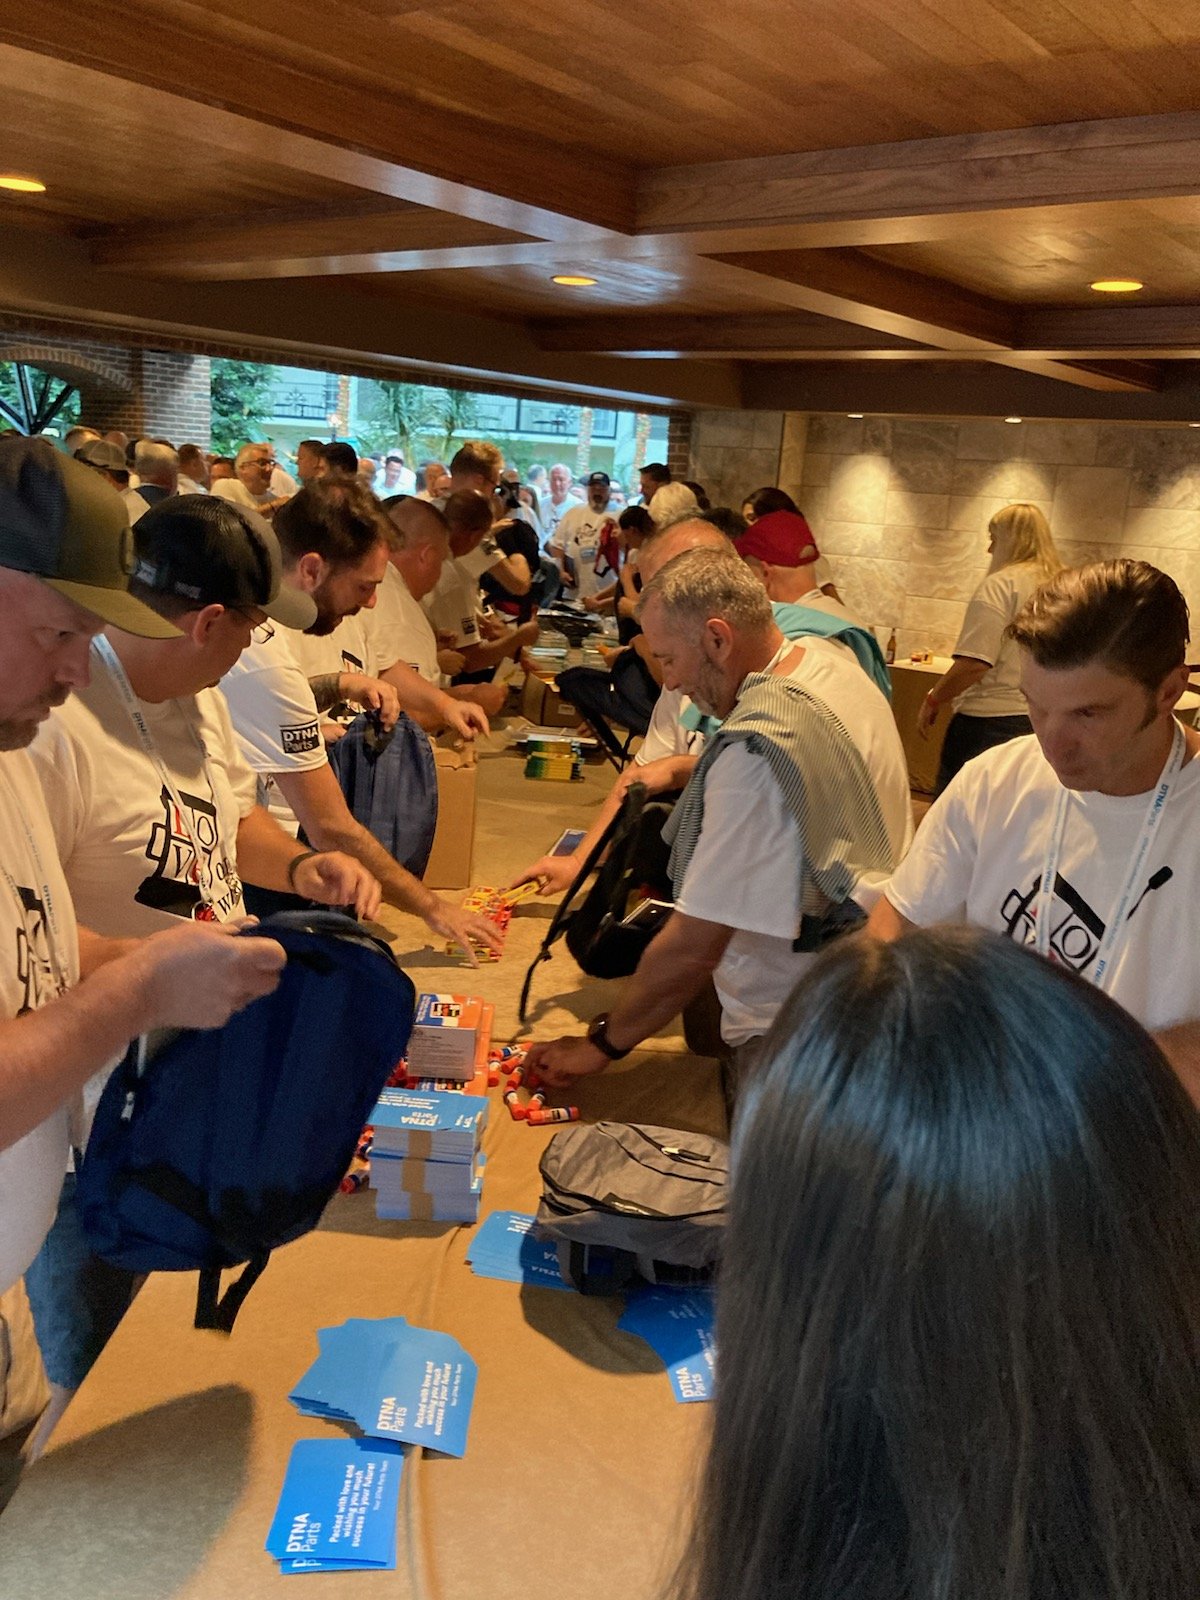 August 2022: Creative Solutions and DTNA from Ohio packed and donated 500 filled backpacks and Love on Wheels T-shirts.